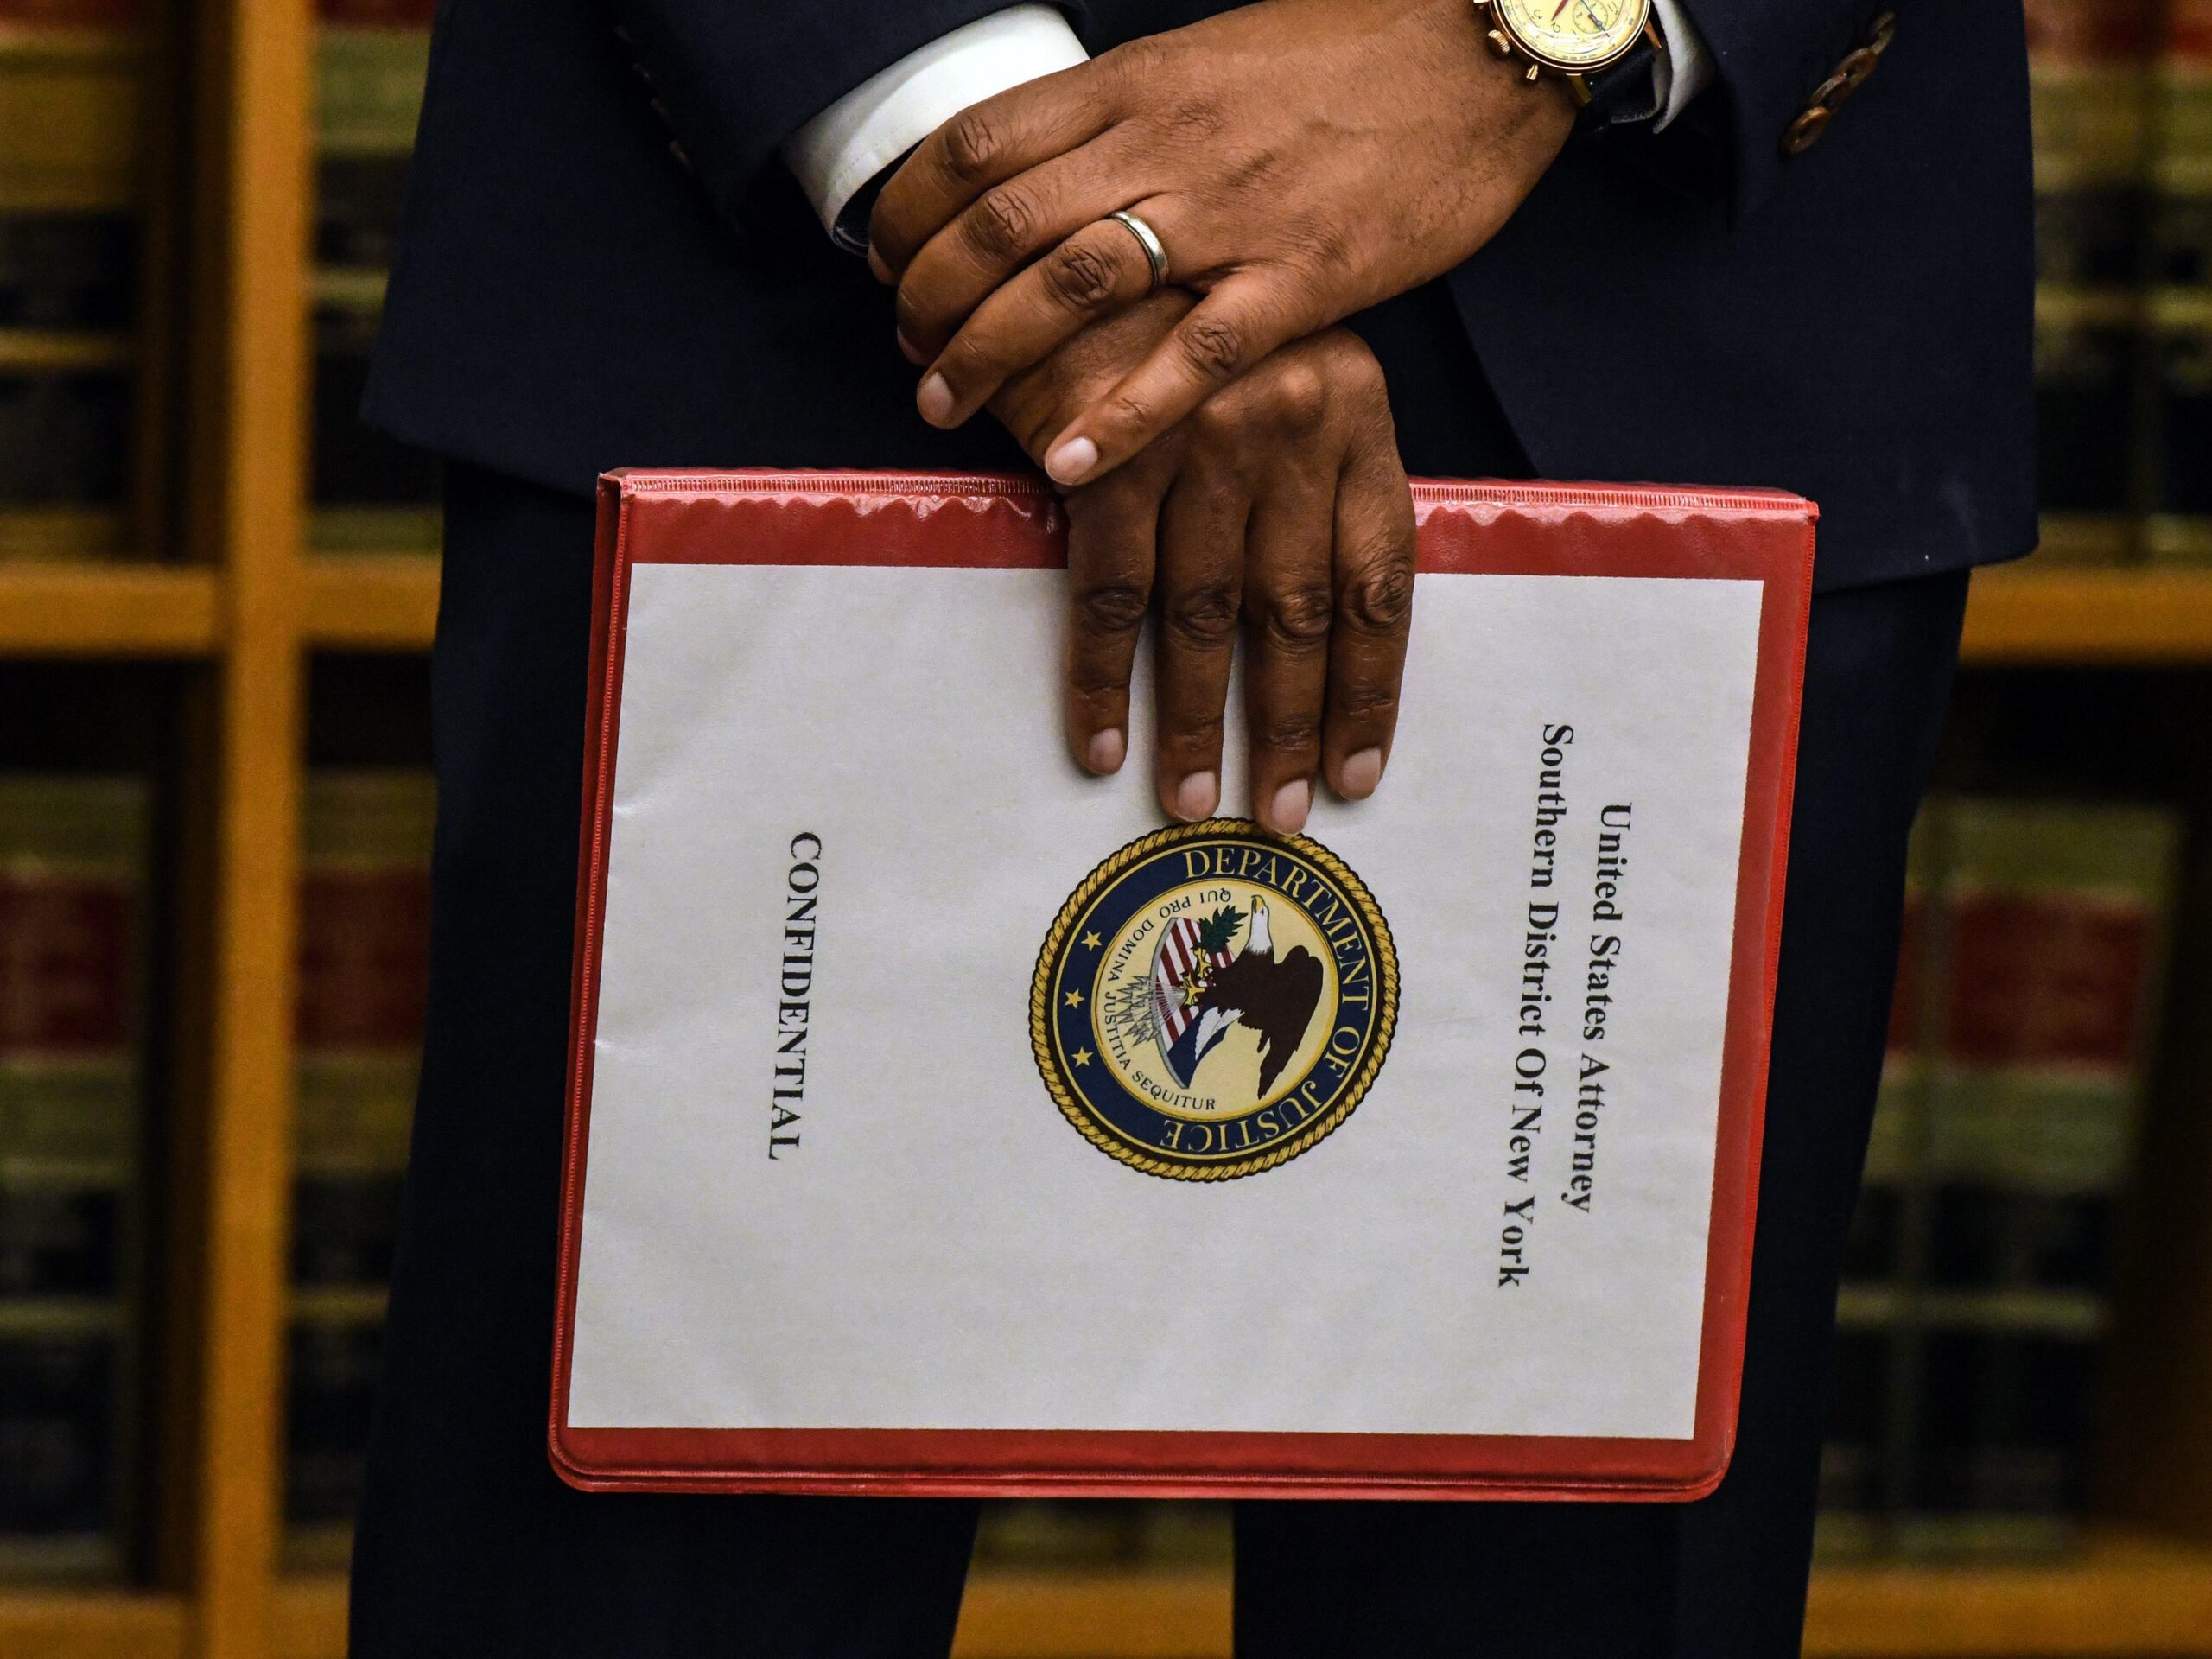 Hands holding a file with cover titled "United States Attorney Southern District of New York."